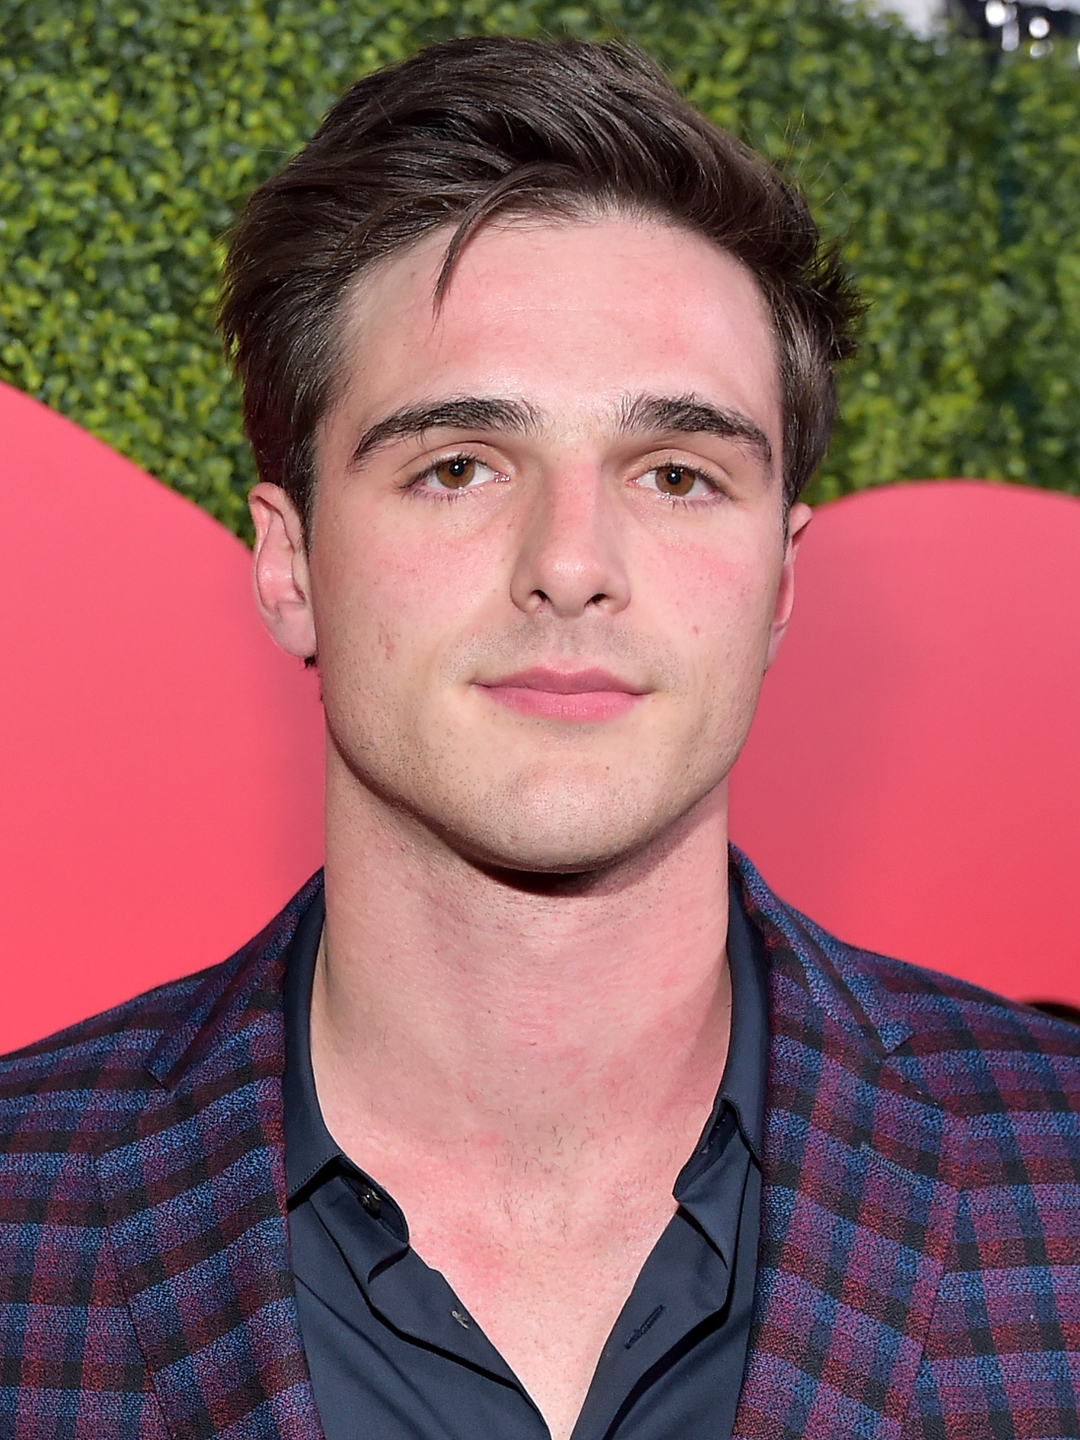 Jacob Elordi who is his mother